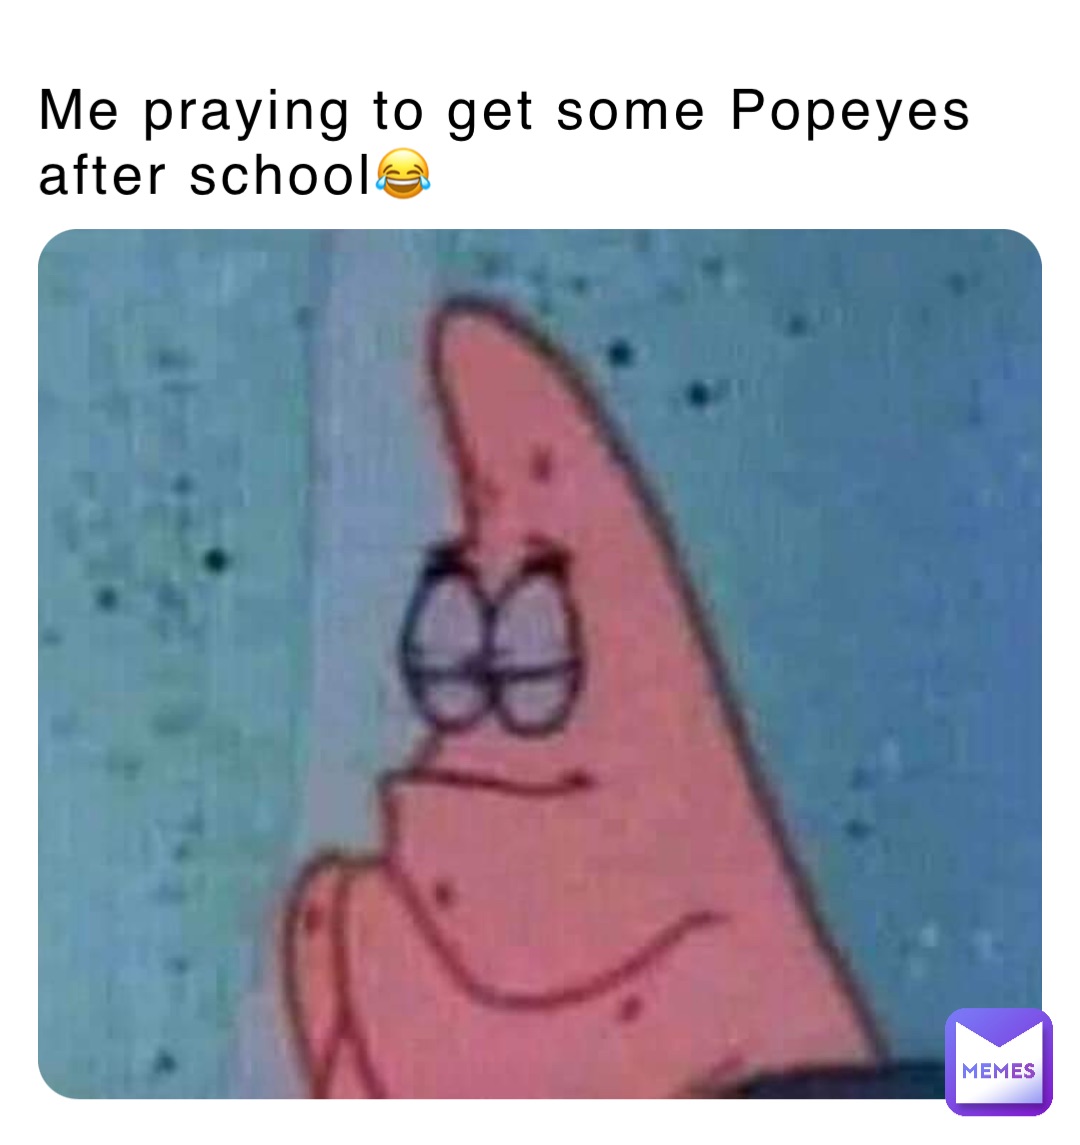 Me praying to get some Popeyes after school😂